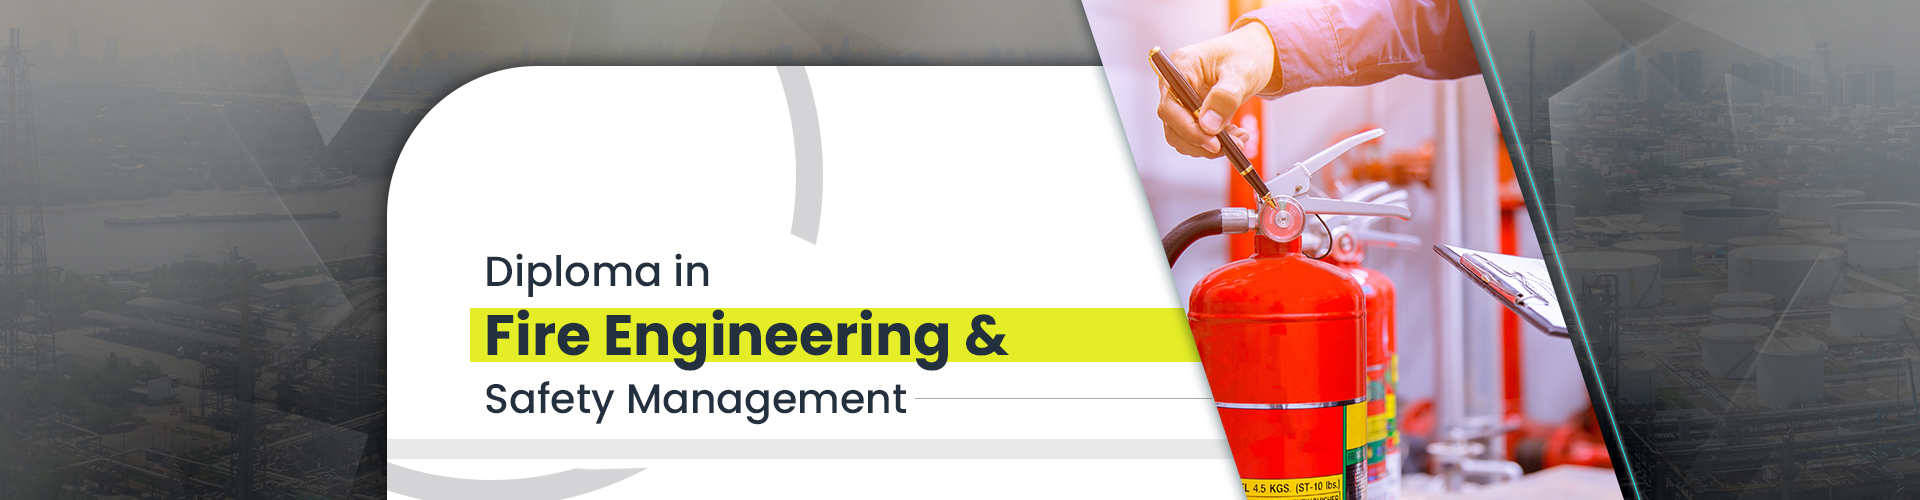 Diploma in Fire Engineering & Safety Management